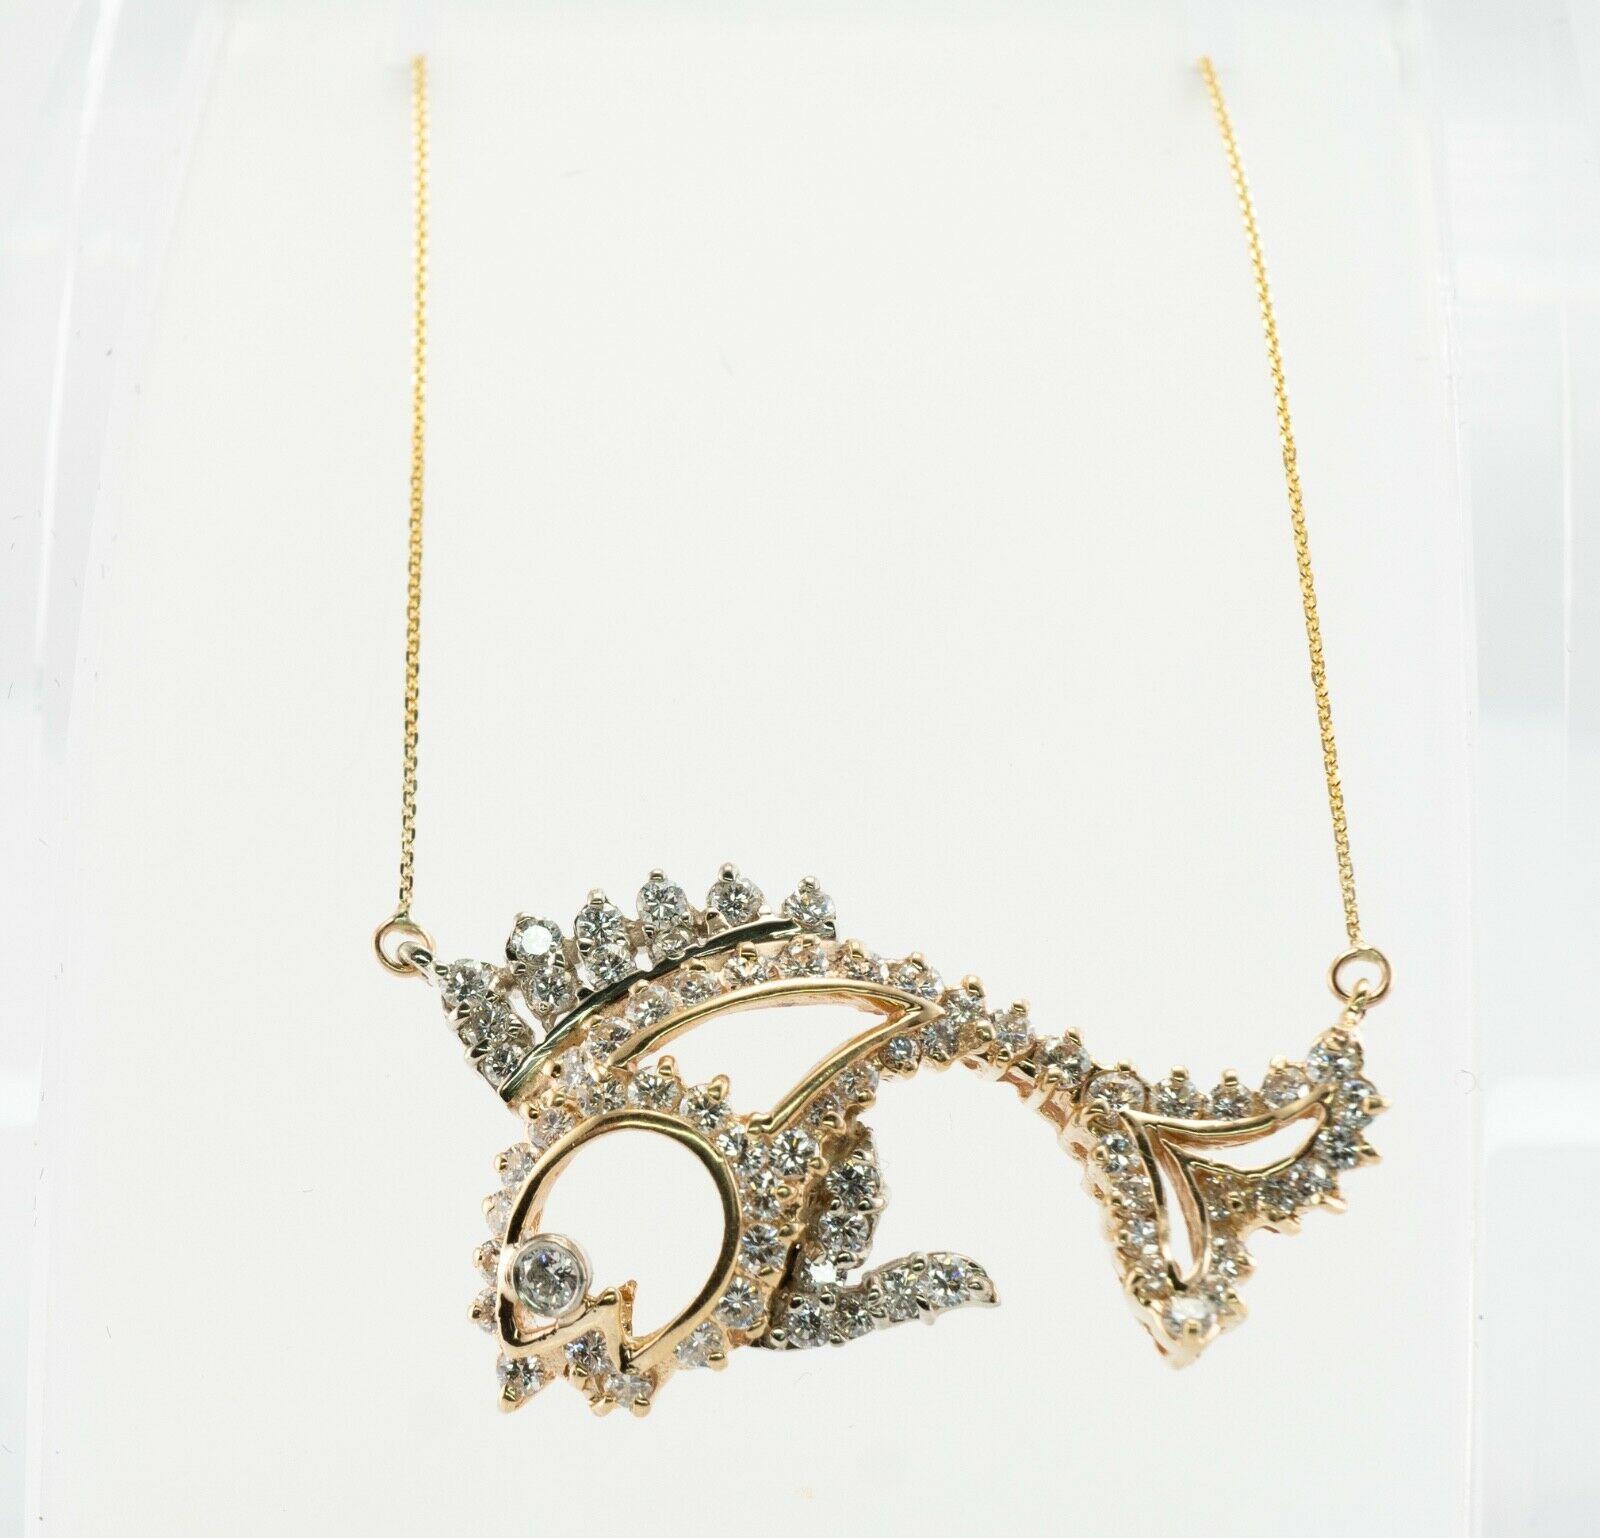 Diamond Fish Necklace Pendant 14K Gold 2.44 TDW In Good Condition For Sale In East Brunswick, NJ